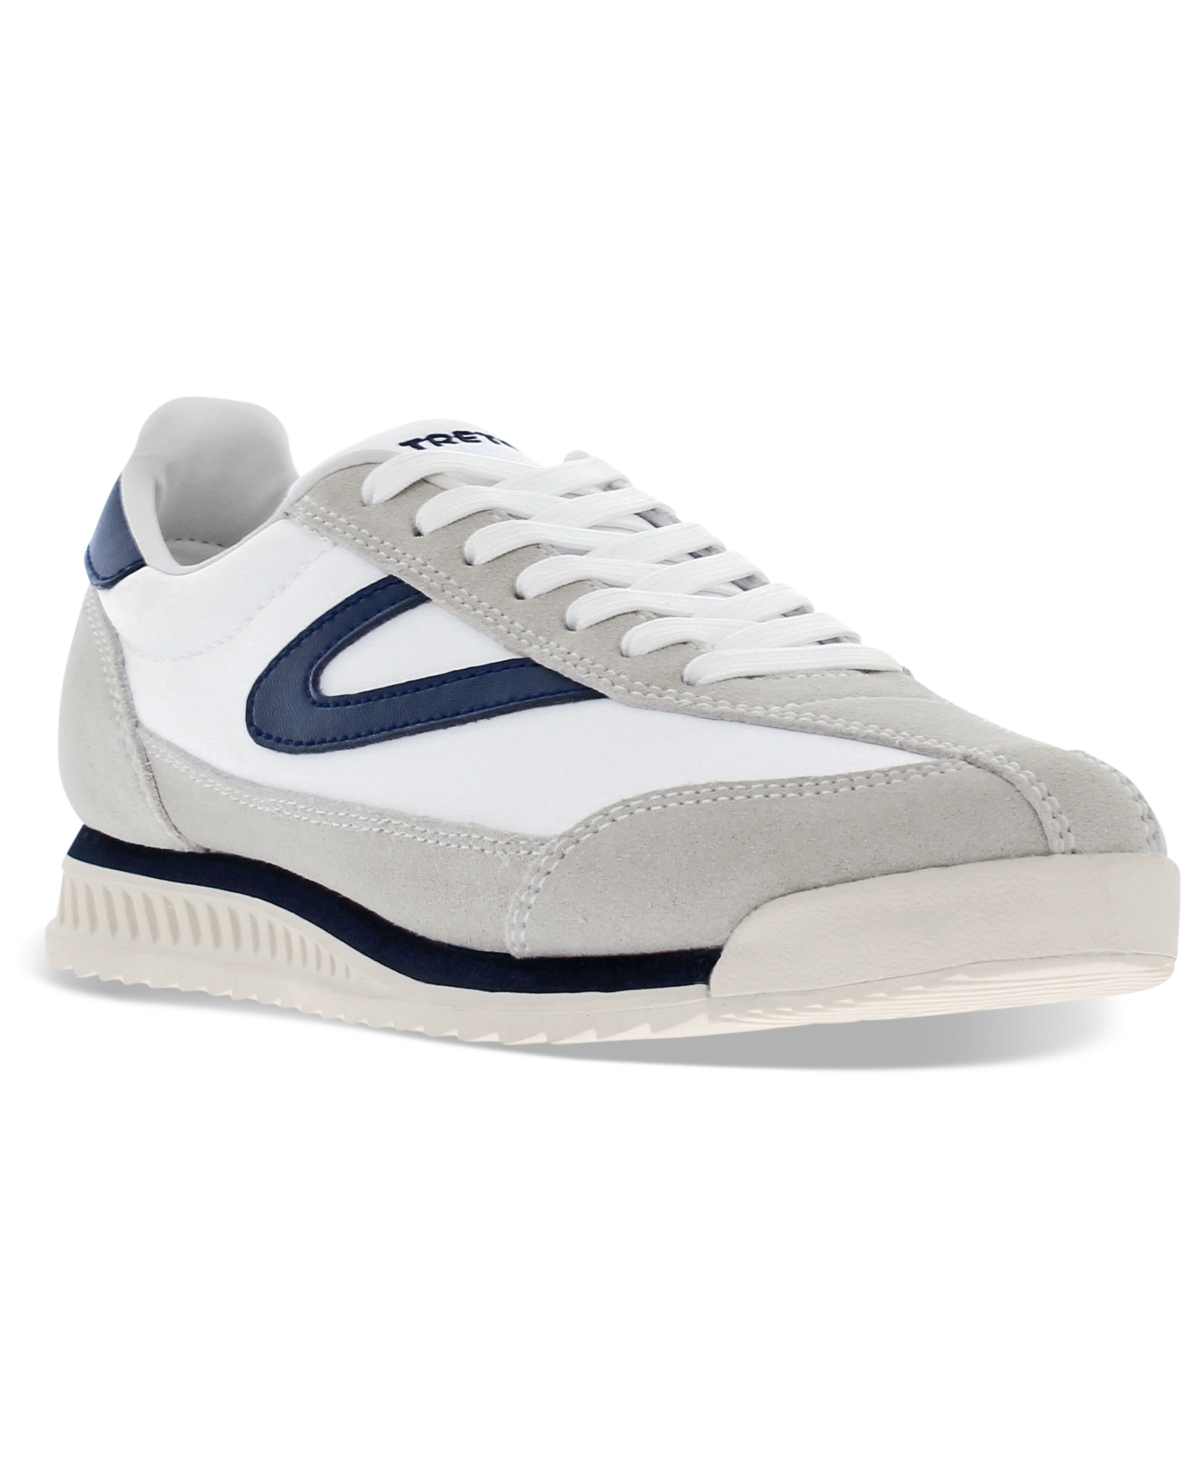 Women's Rawlins Sneakers from Finish Line - White/navy